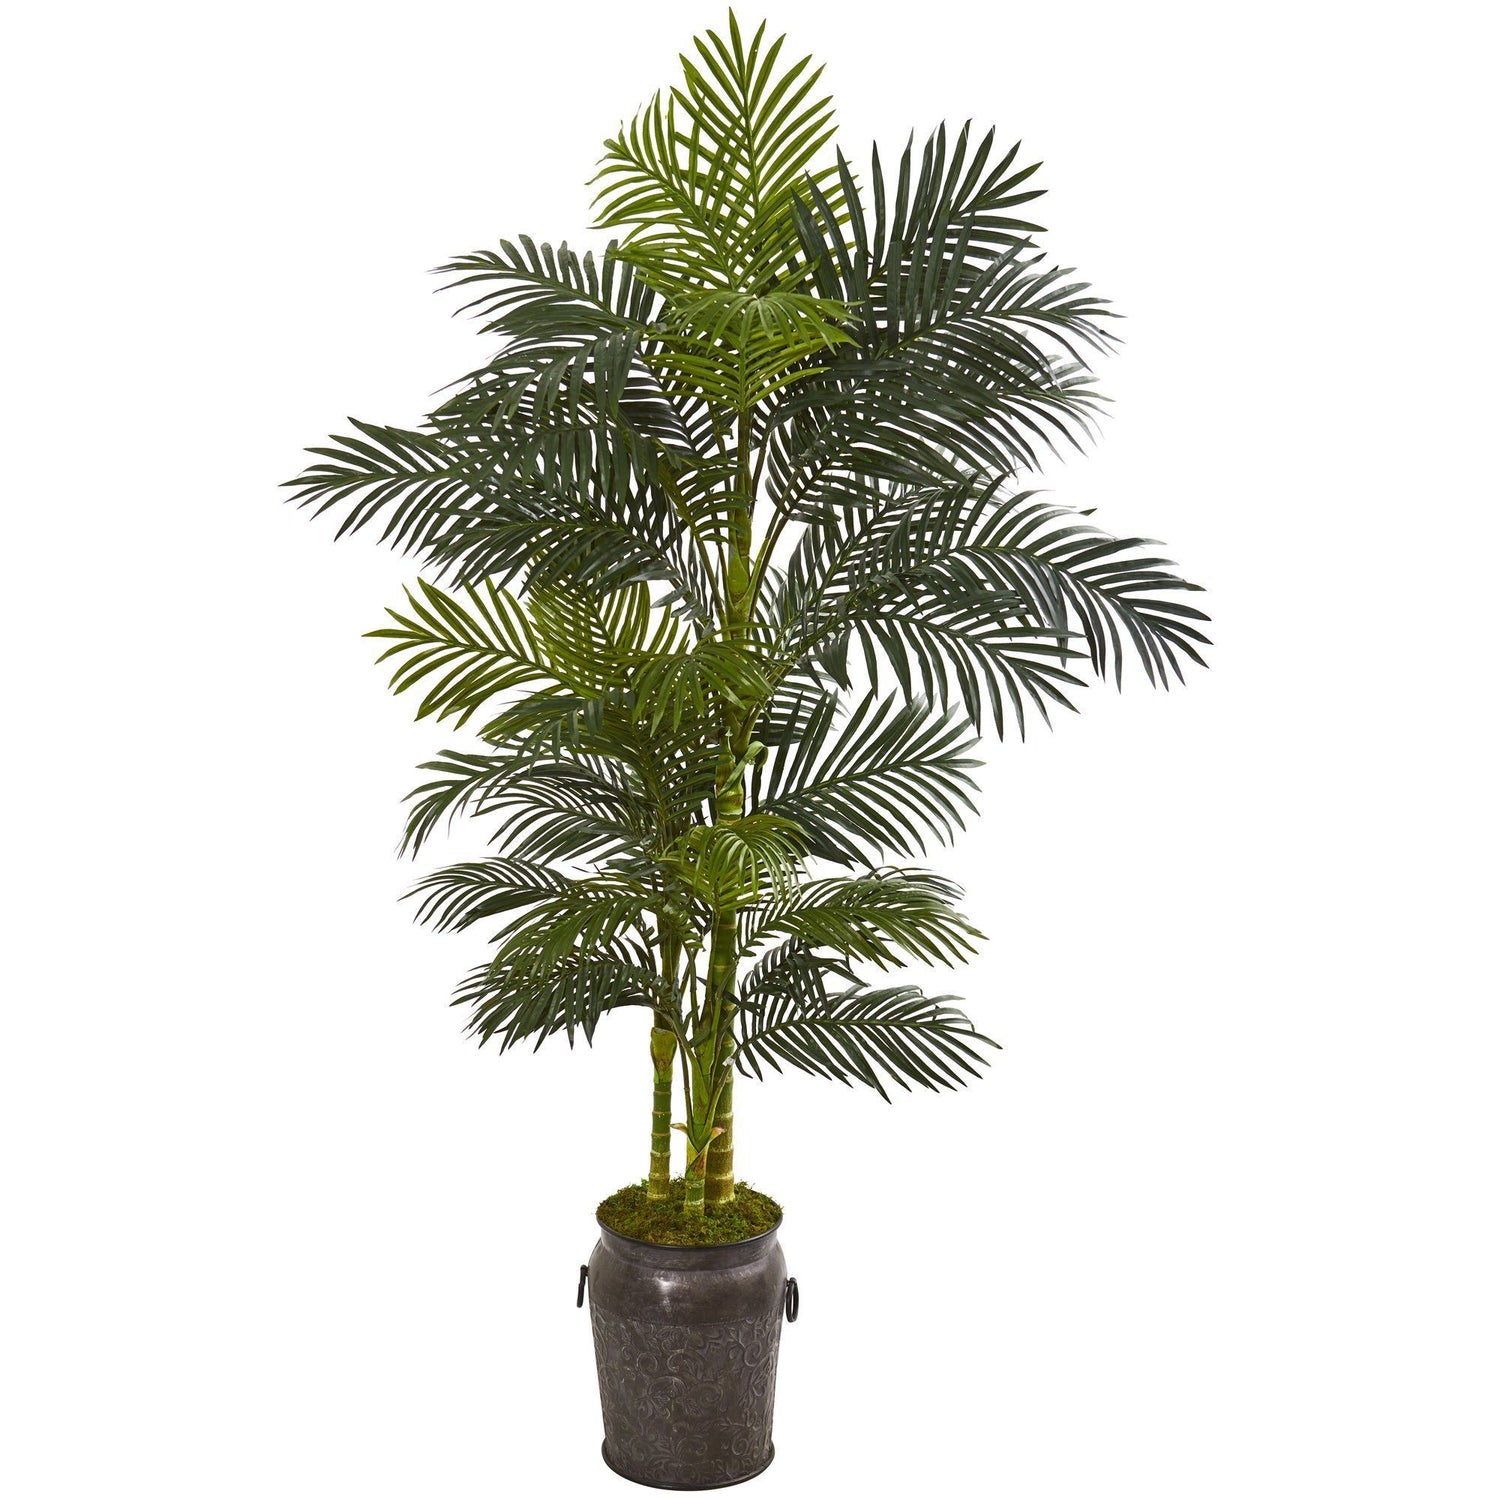 7’ Golden Cane Artificial Palm Tree in Decorative Planter